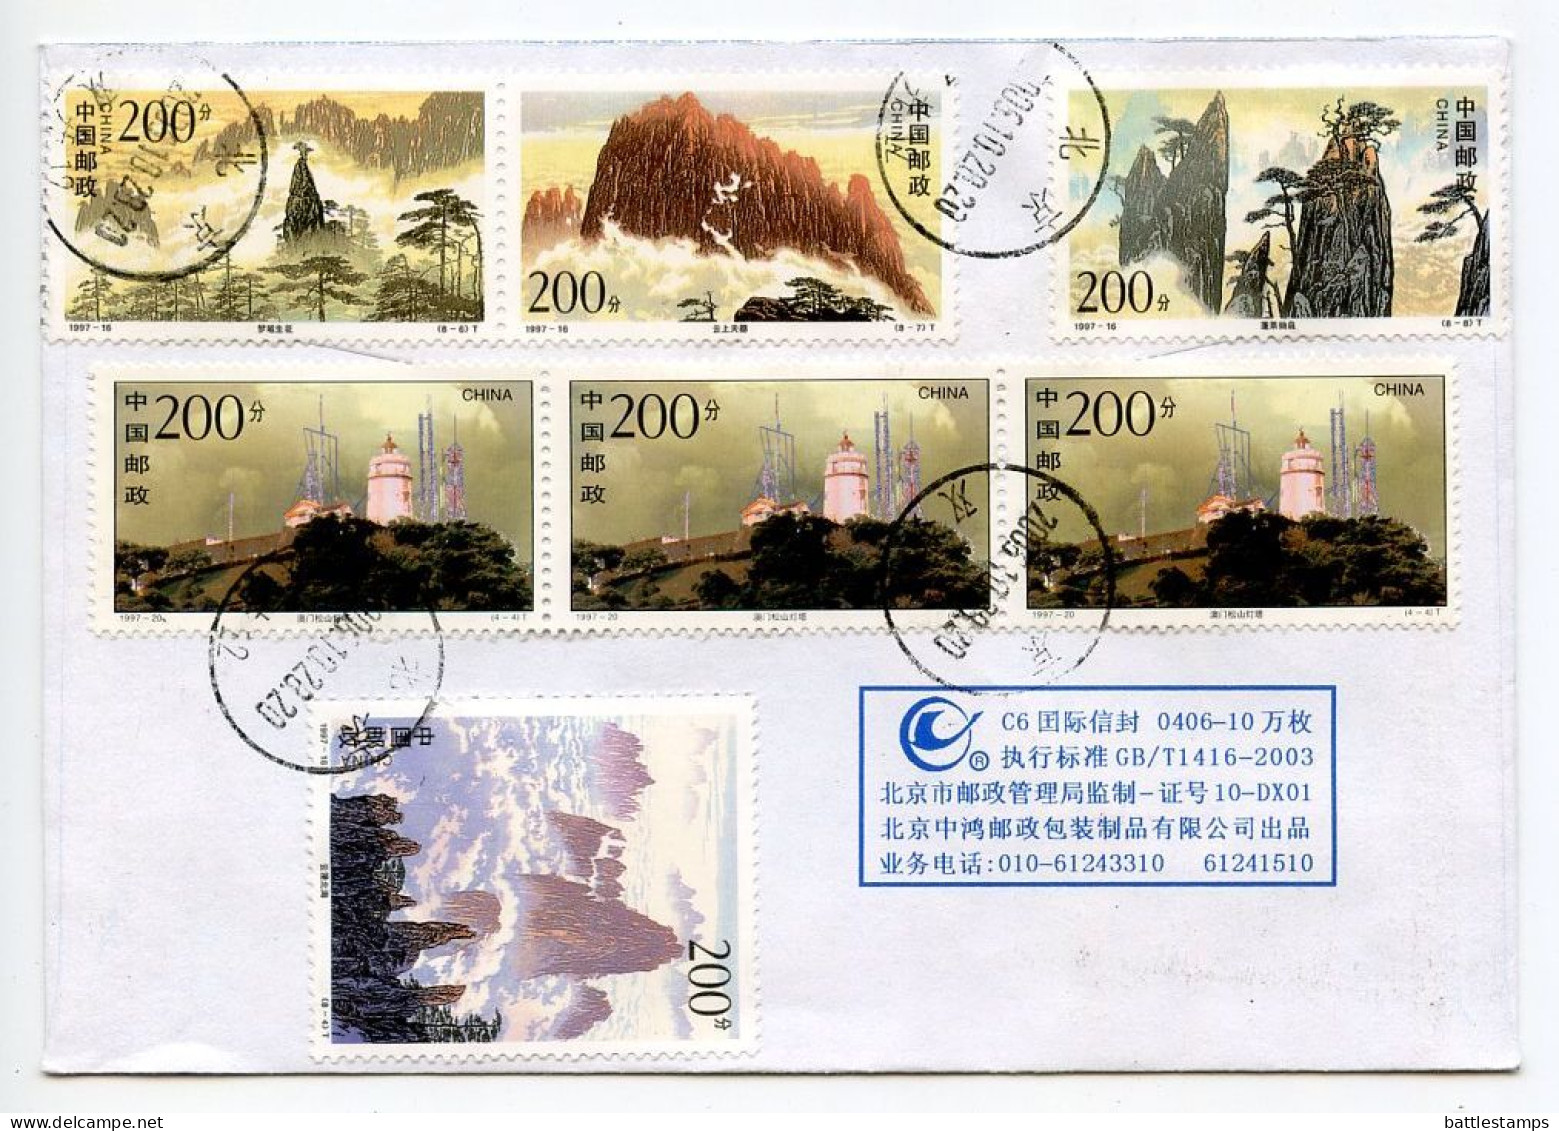 China, PRC 2006 Registered Airmail Cover - Bejing To Hartford, Vermont; Scott 2805d & F-h, And 2815 X 3 - Covers & Documents